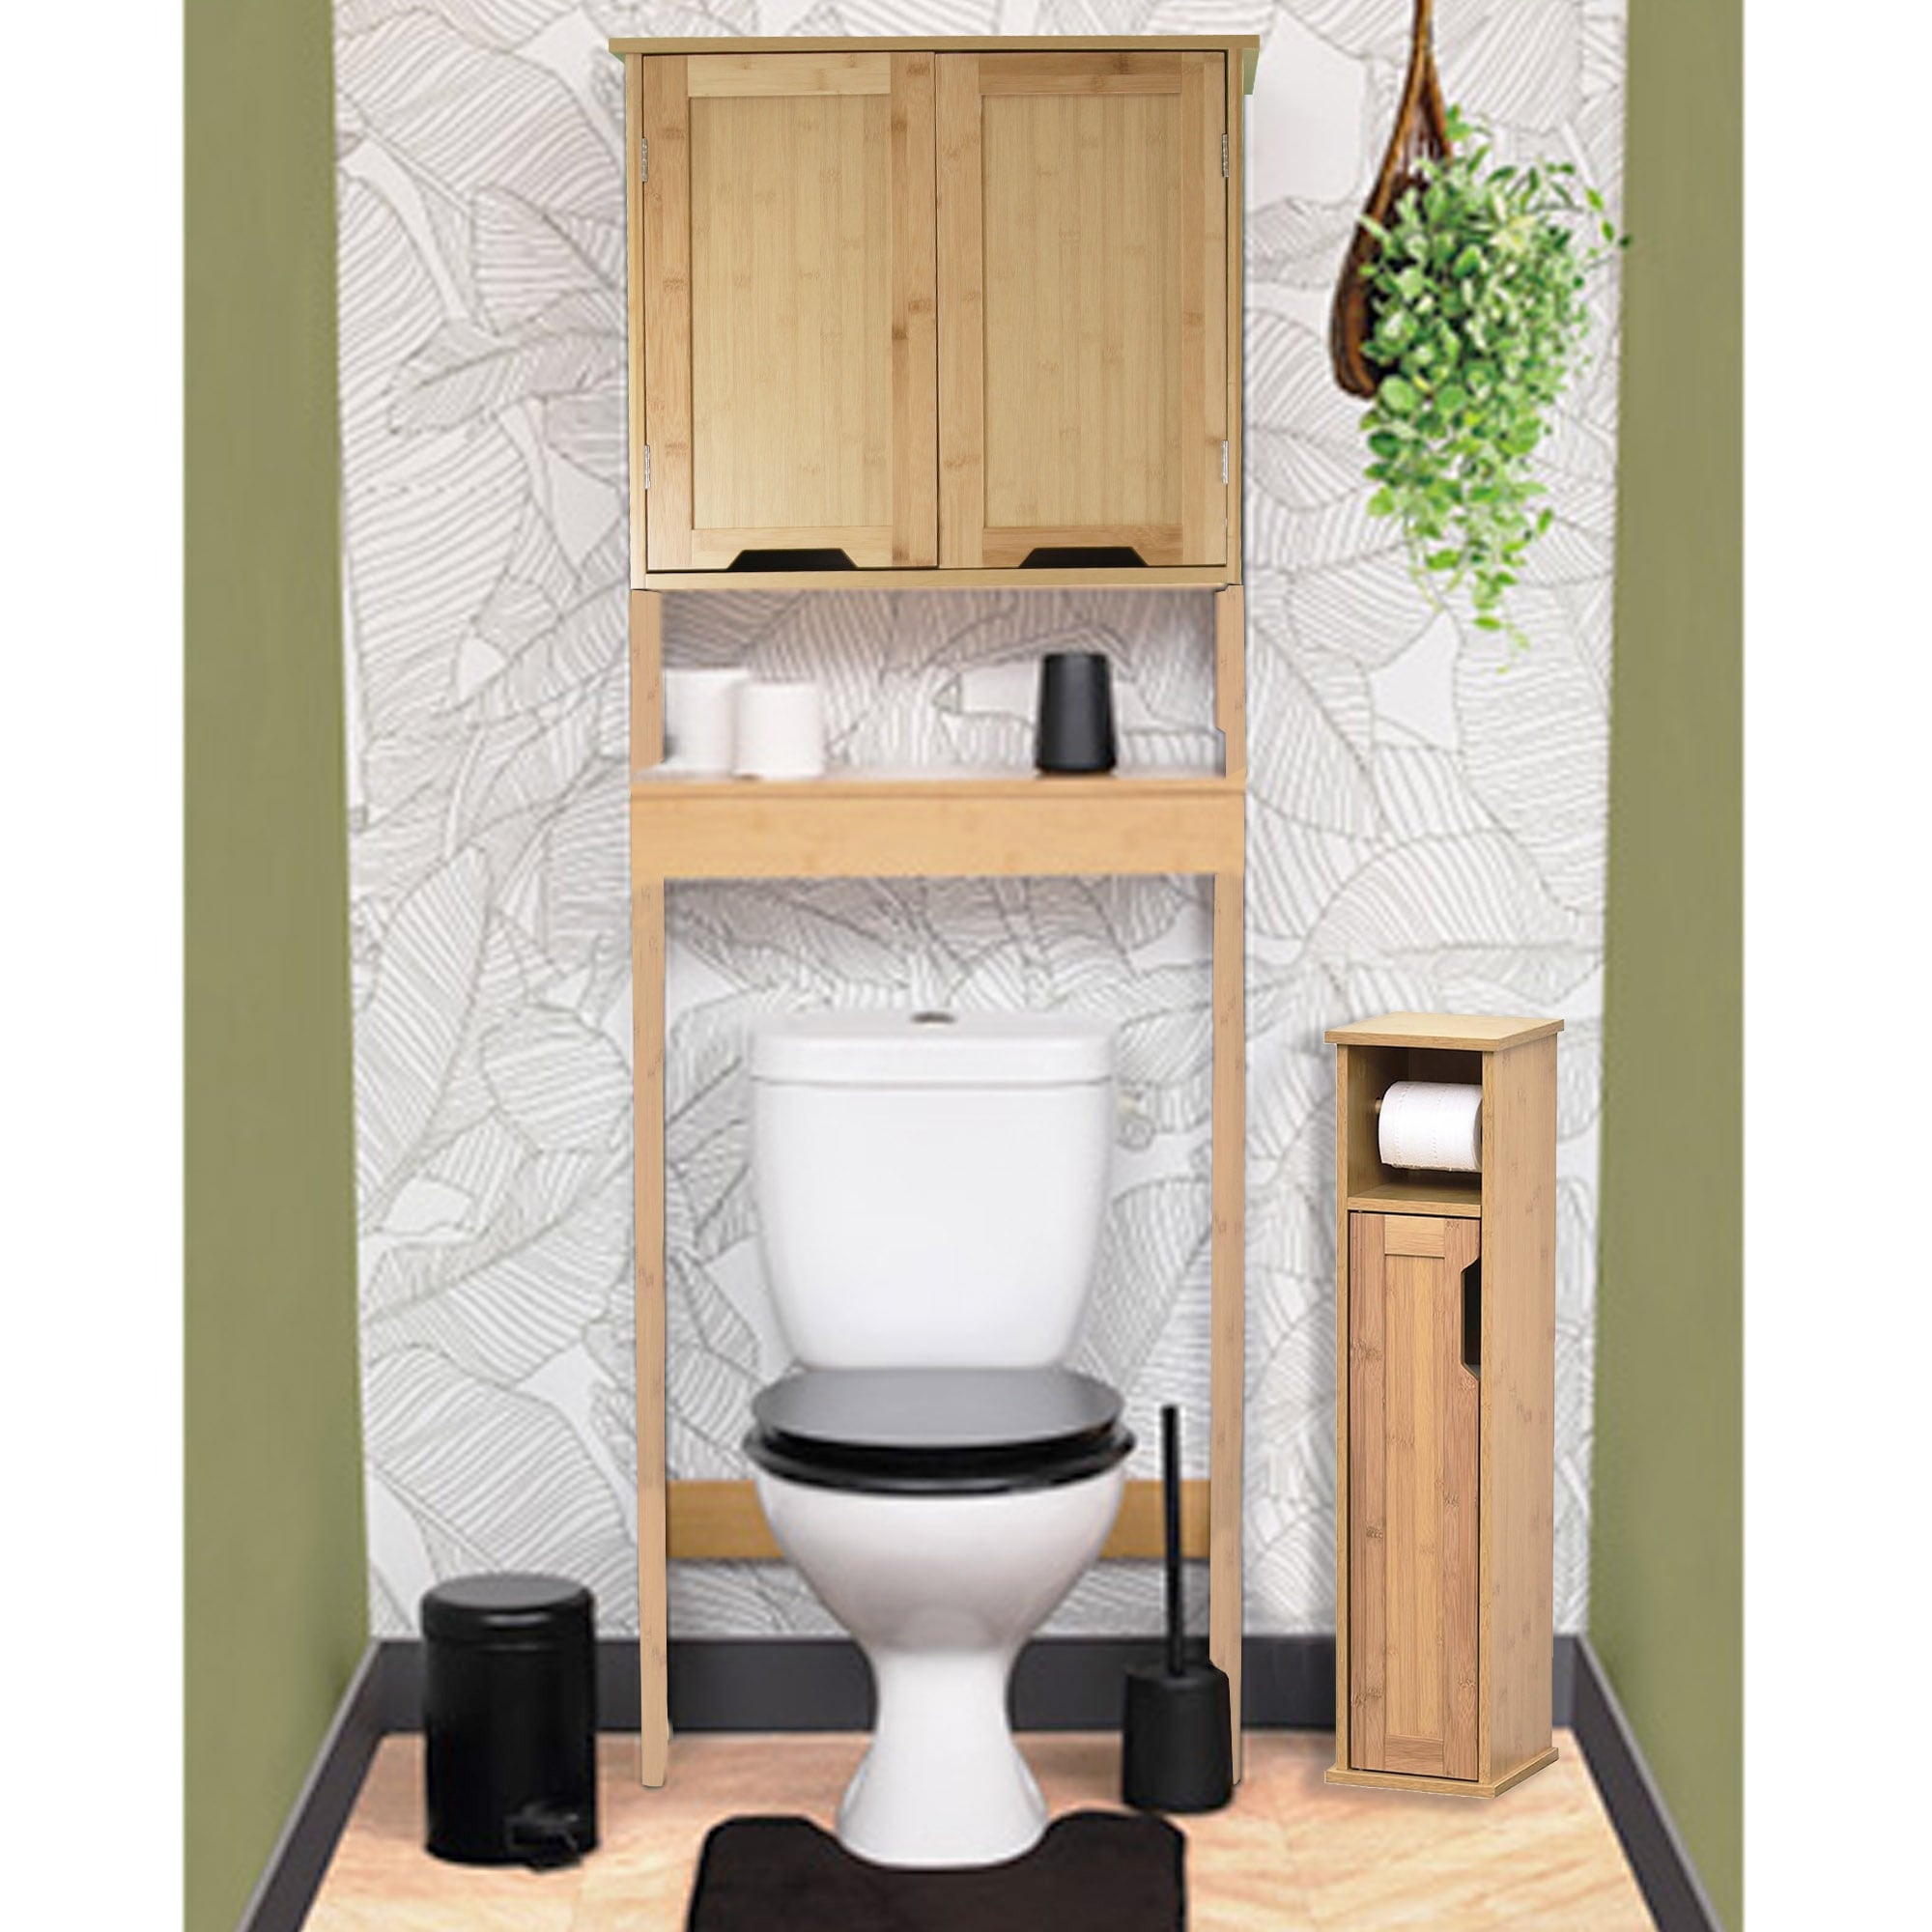 https://ak1.ostkcdn.com/images/products/is/images/direct/22e7ece43e91eab76c9117d2cb288bac9c81c8c6/2-in-1-Toilet-Paper-Holder-Stand-Cabinet-and-Reserve.jpg